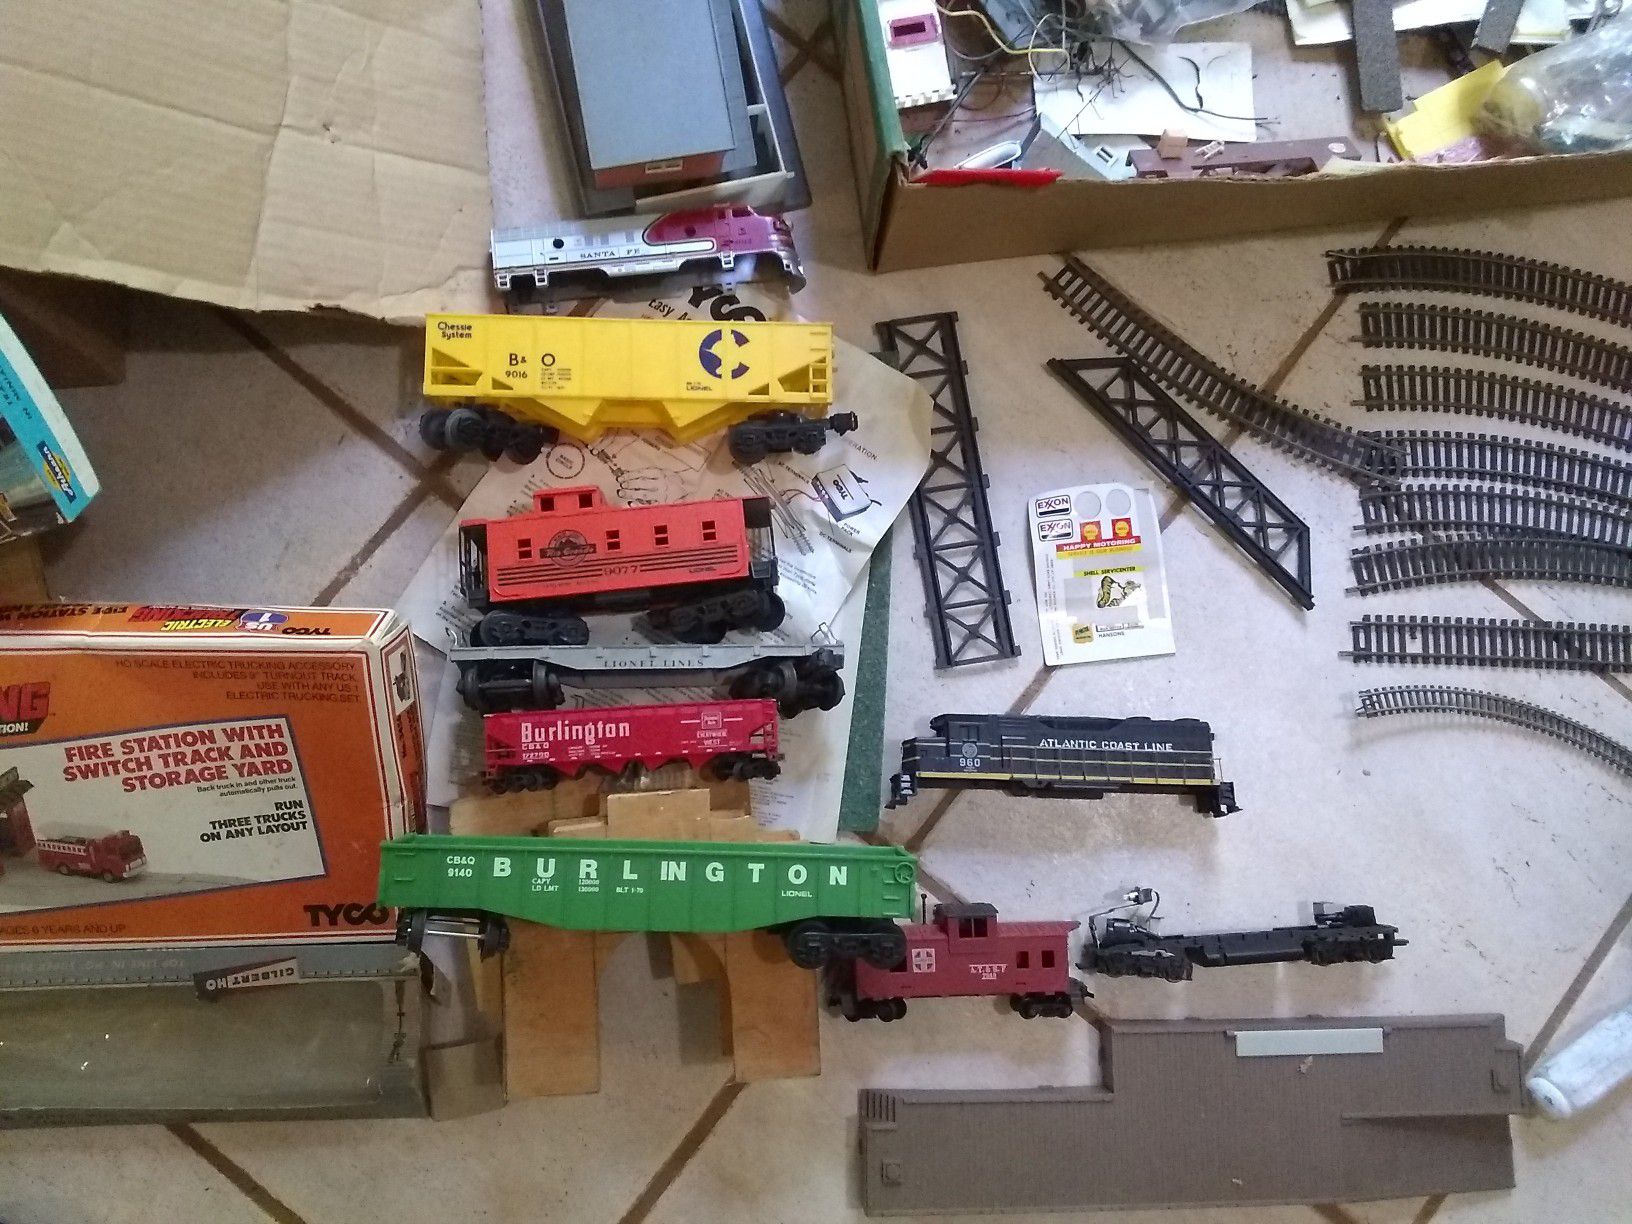 Miscellaneous toy train items, track, cars, engines, trucks and buildings